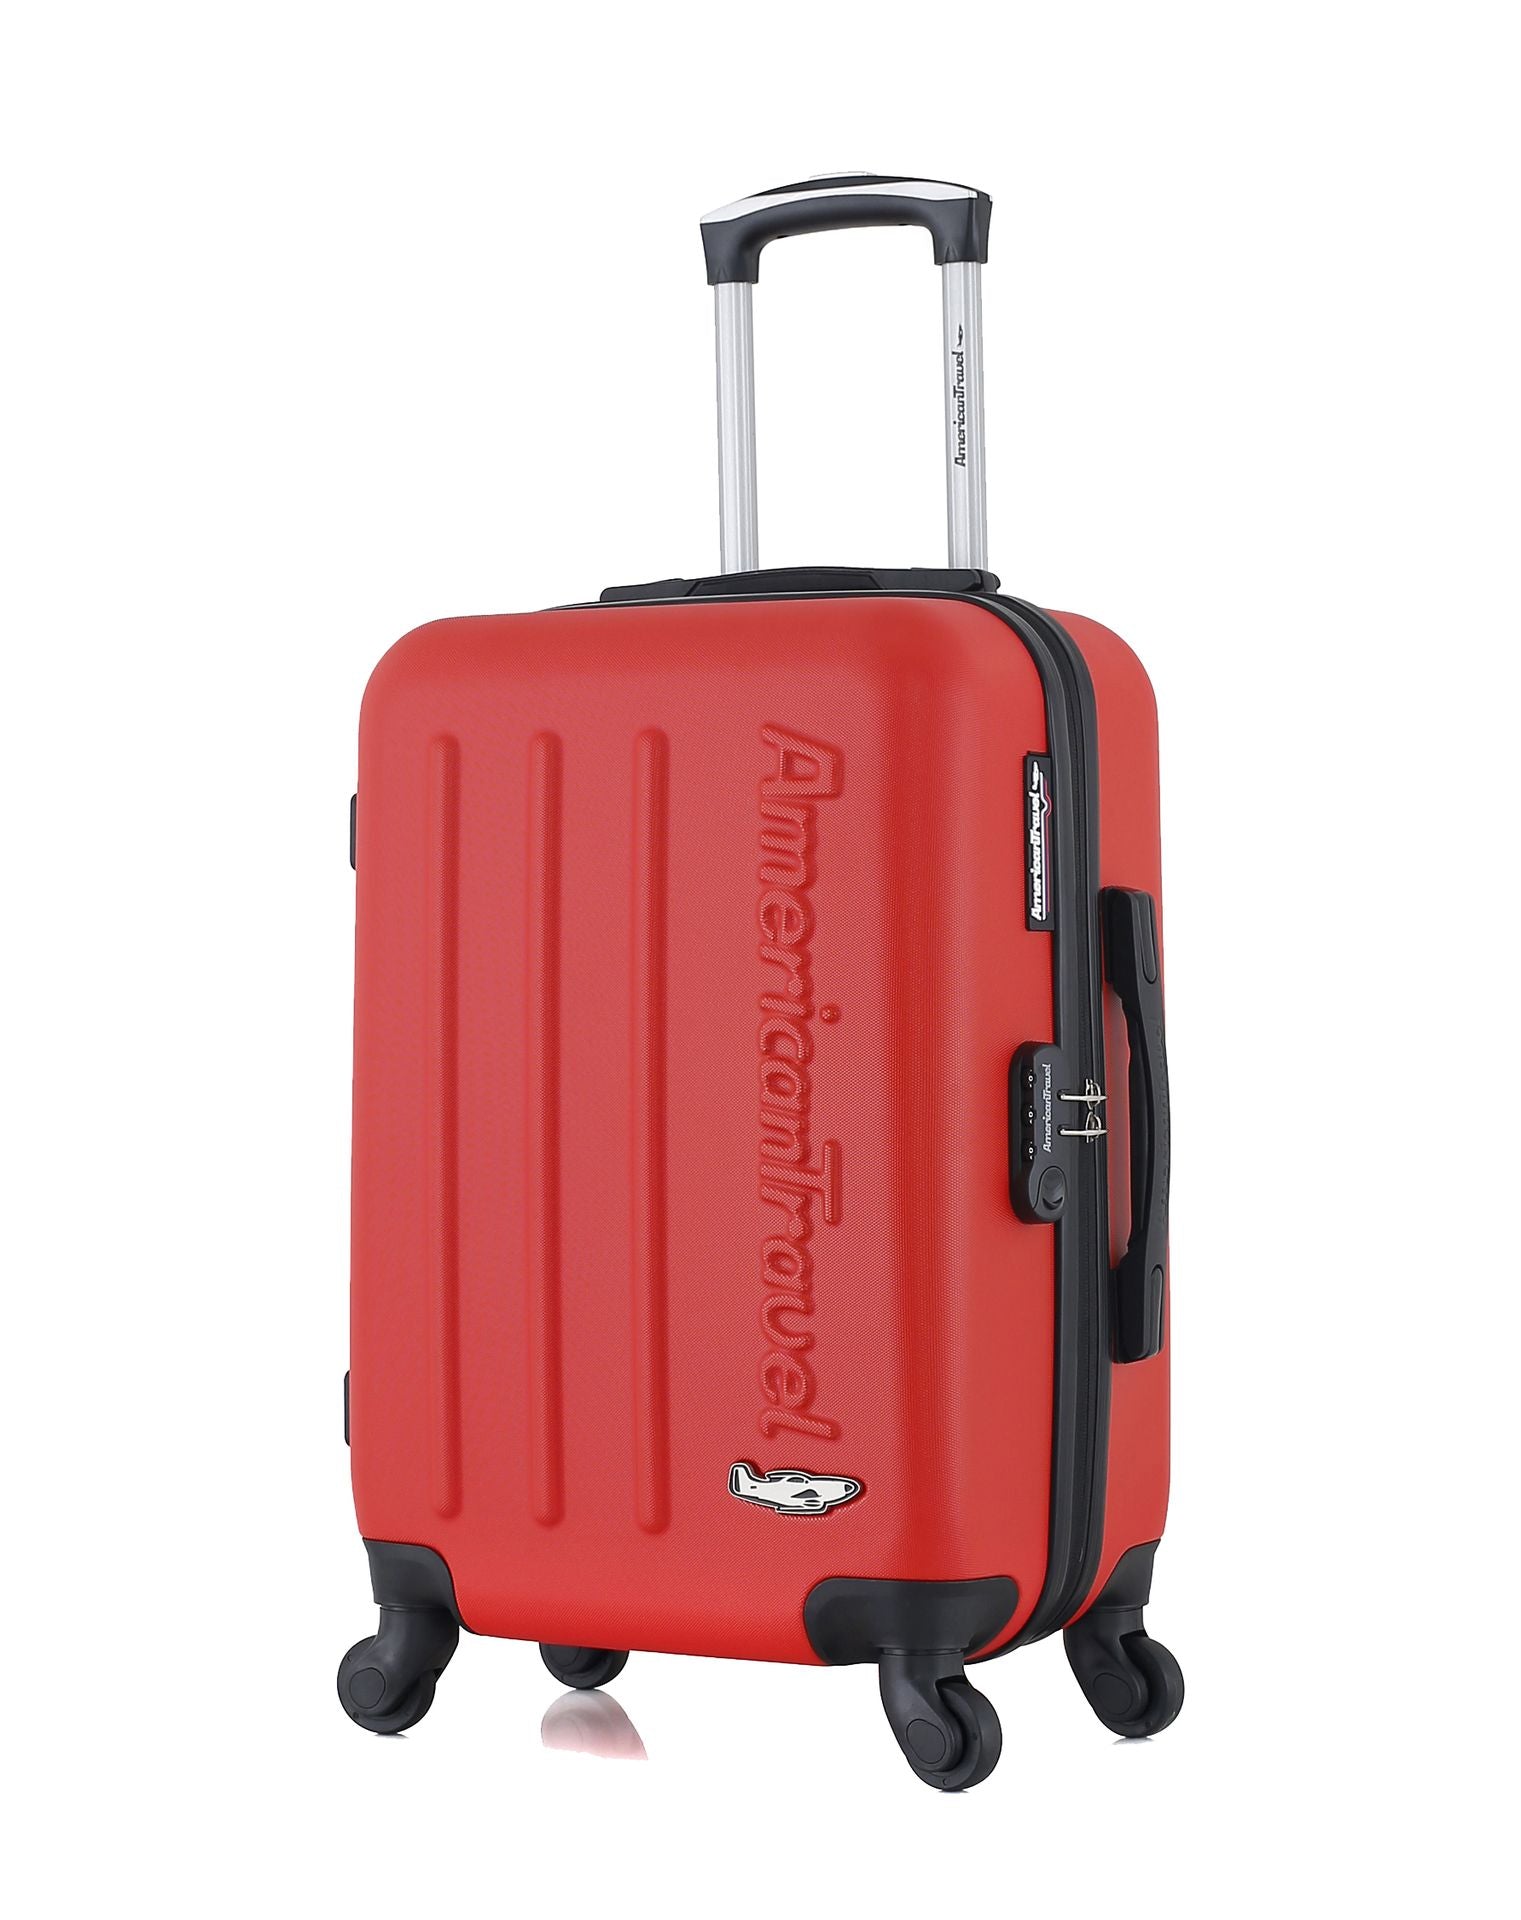 Valise Cabine ABS BRONX 4 Roues 55 cm